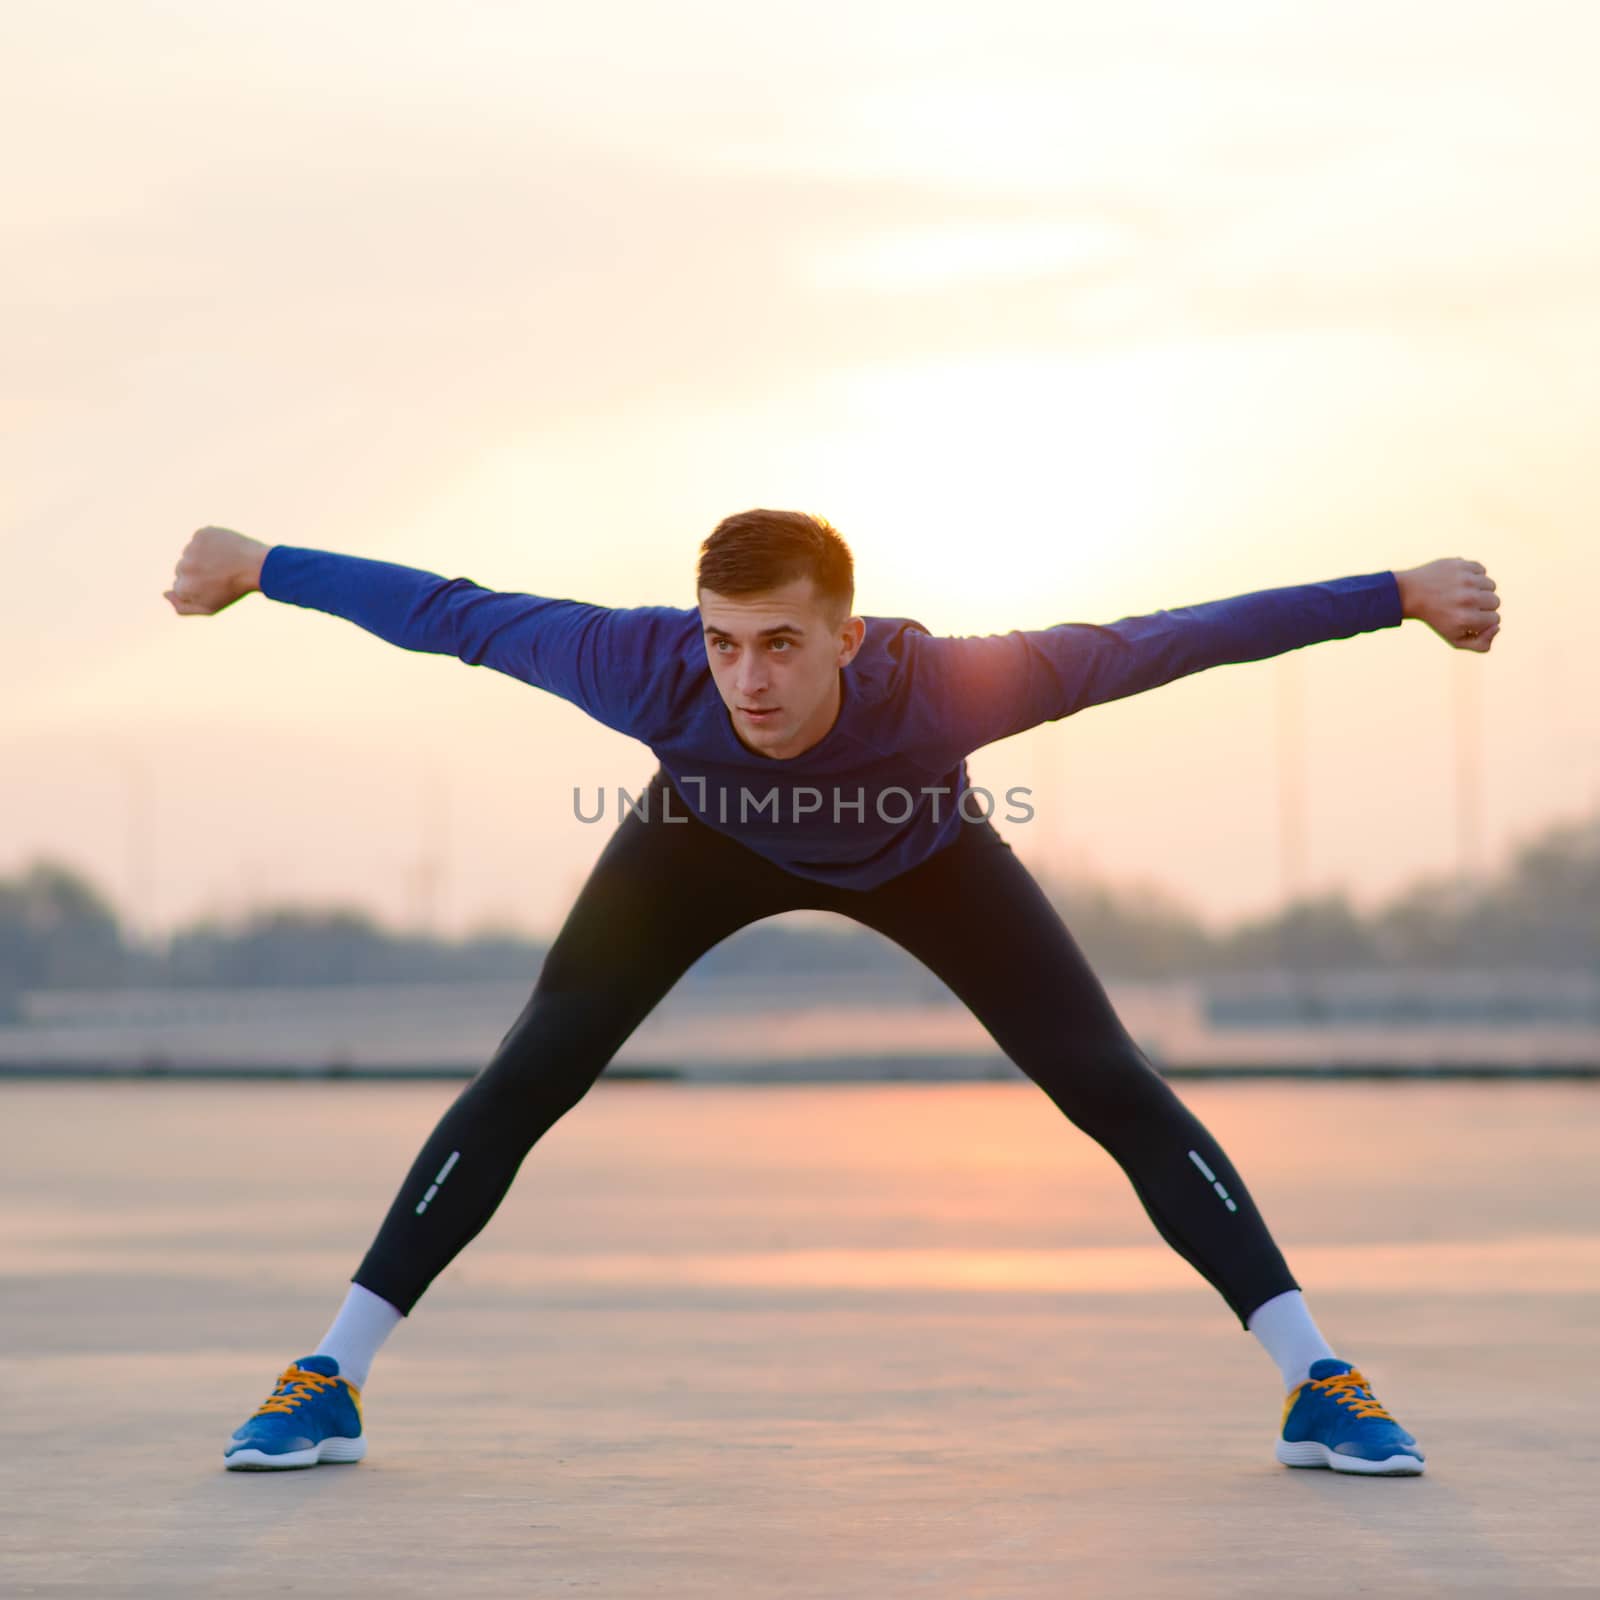 Young Male Runner Stretching Before Run at Sunset. Healthy Lifestyle and Sport Concept. by maxpro